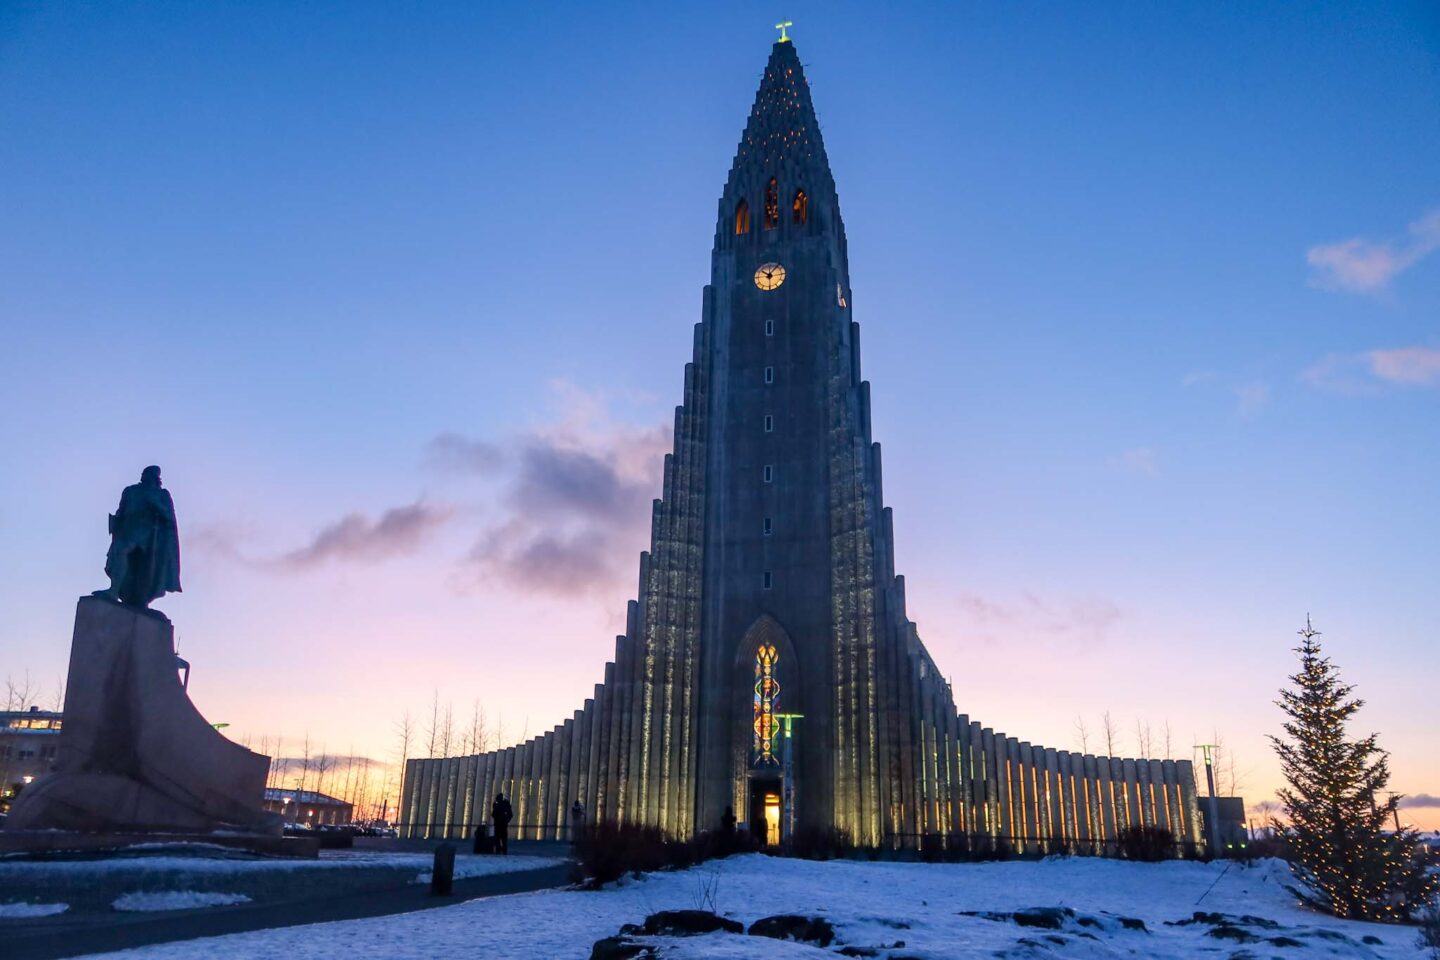 sunrise at Hallgrimskirkja cafe, things to do in iceland in the rain